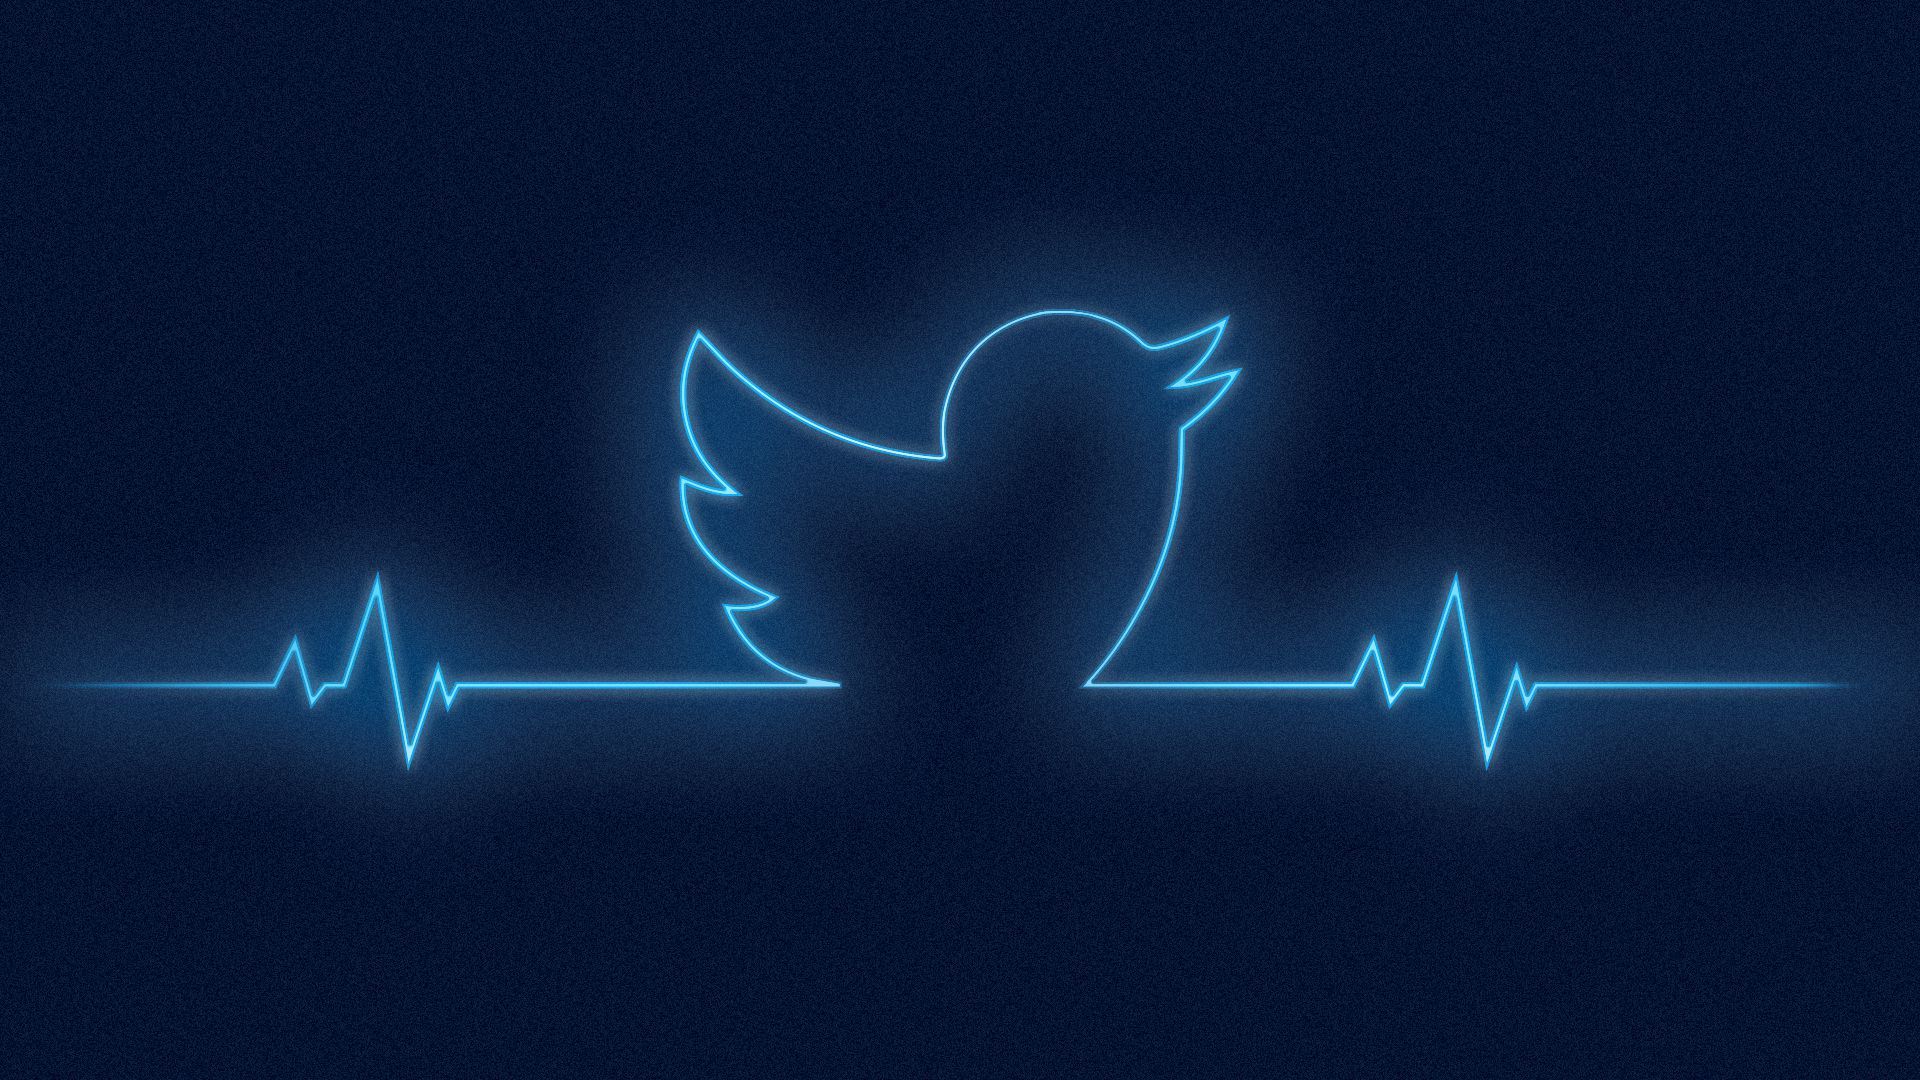 Illustration of a heartbeat line creating a partial twitter logo between beats